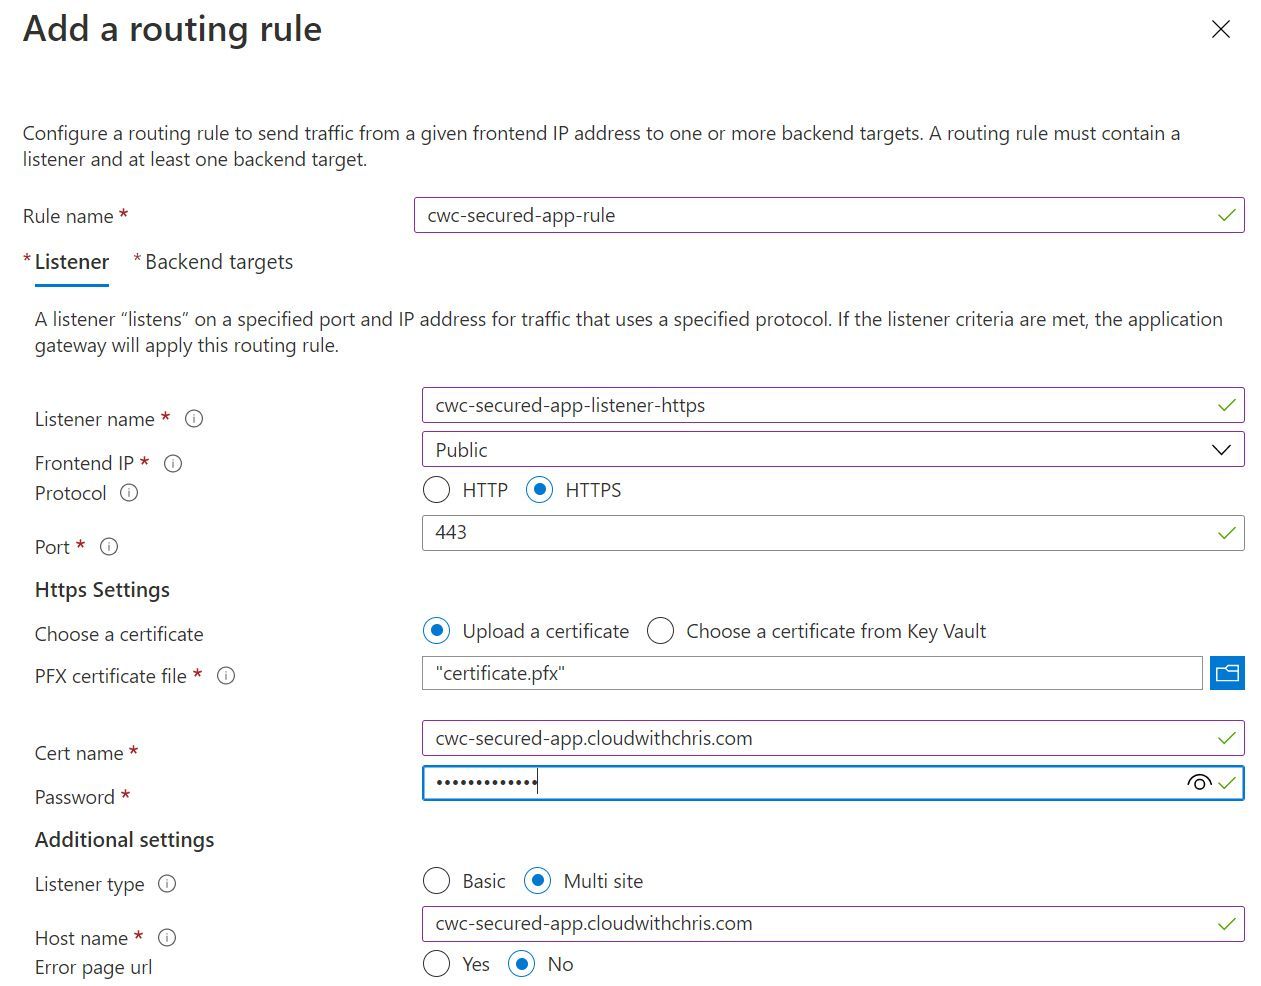 Screenshot showing the the listener configuration in the Routing Rule setup experience